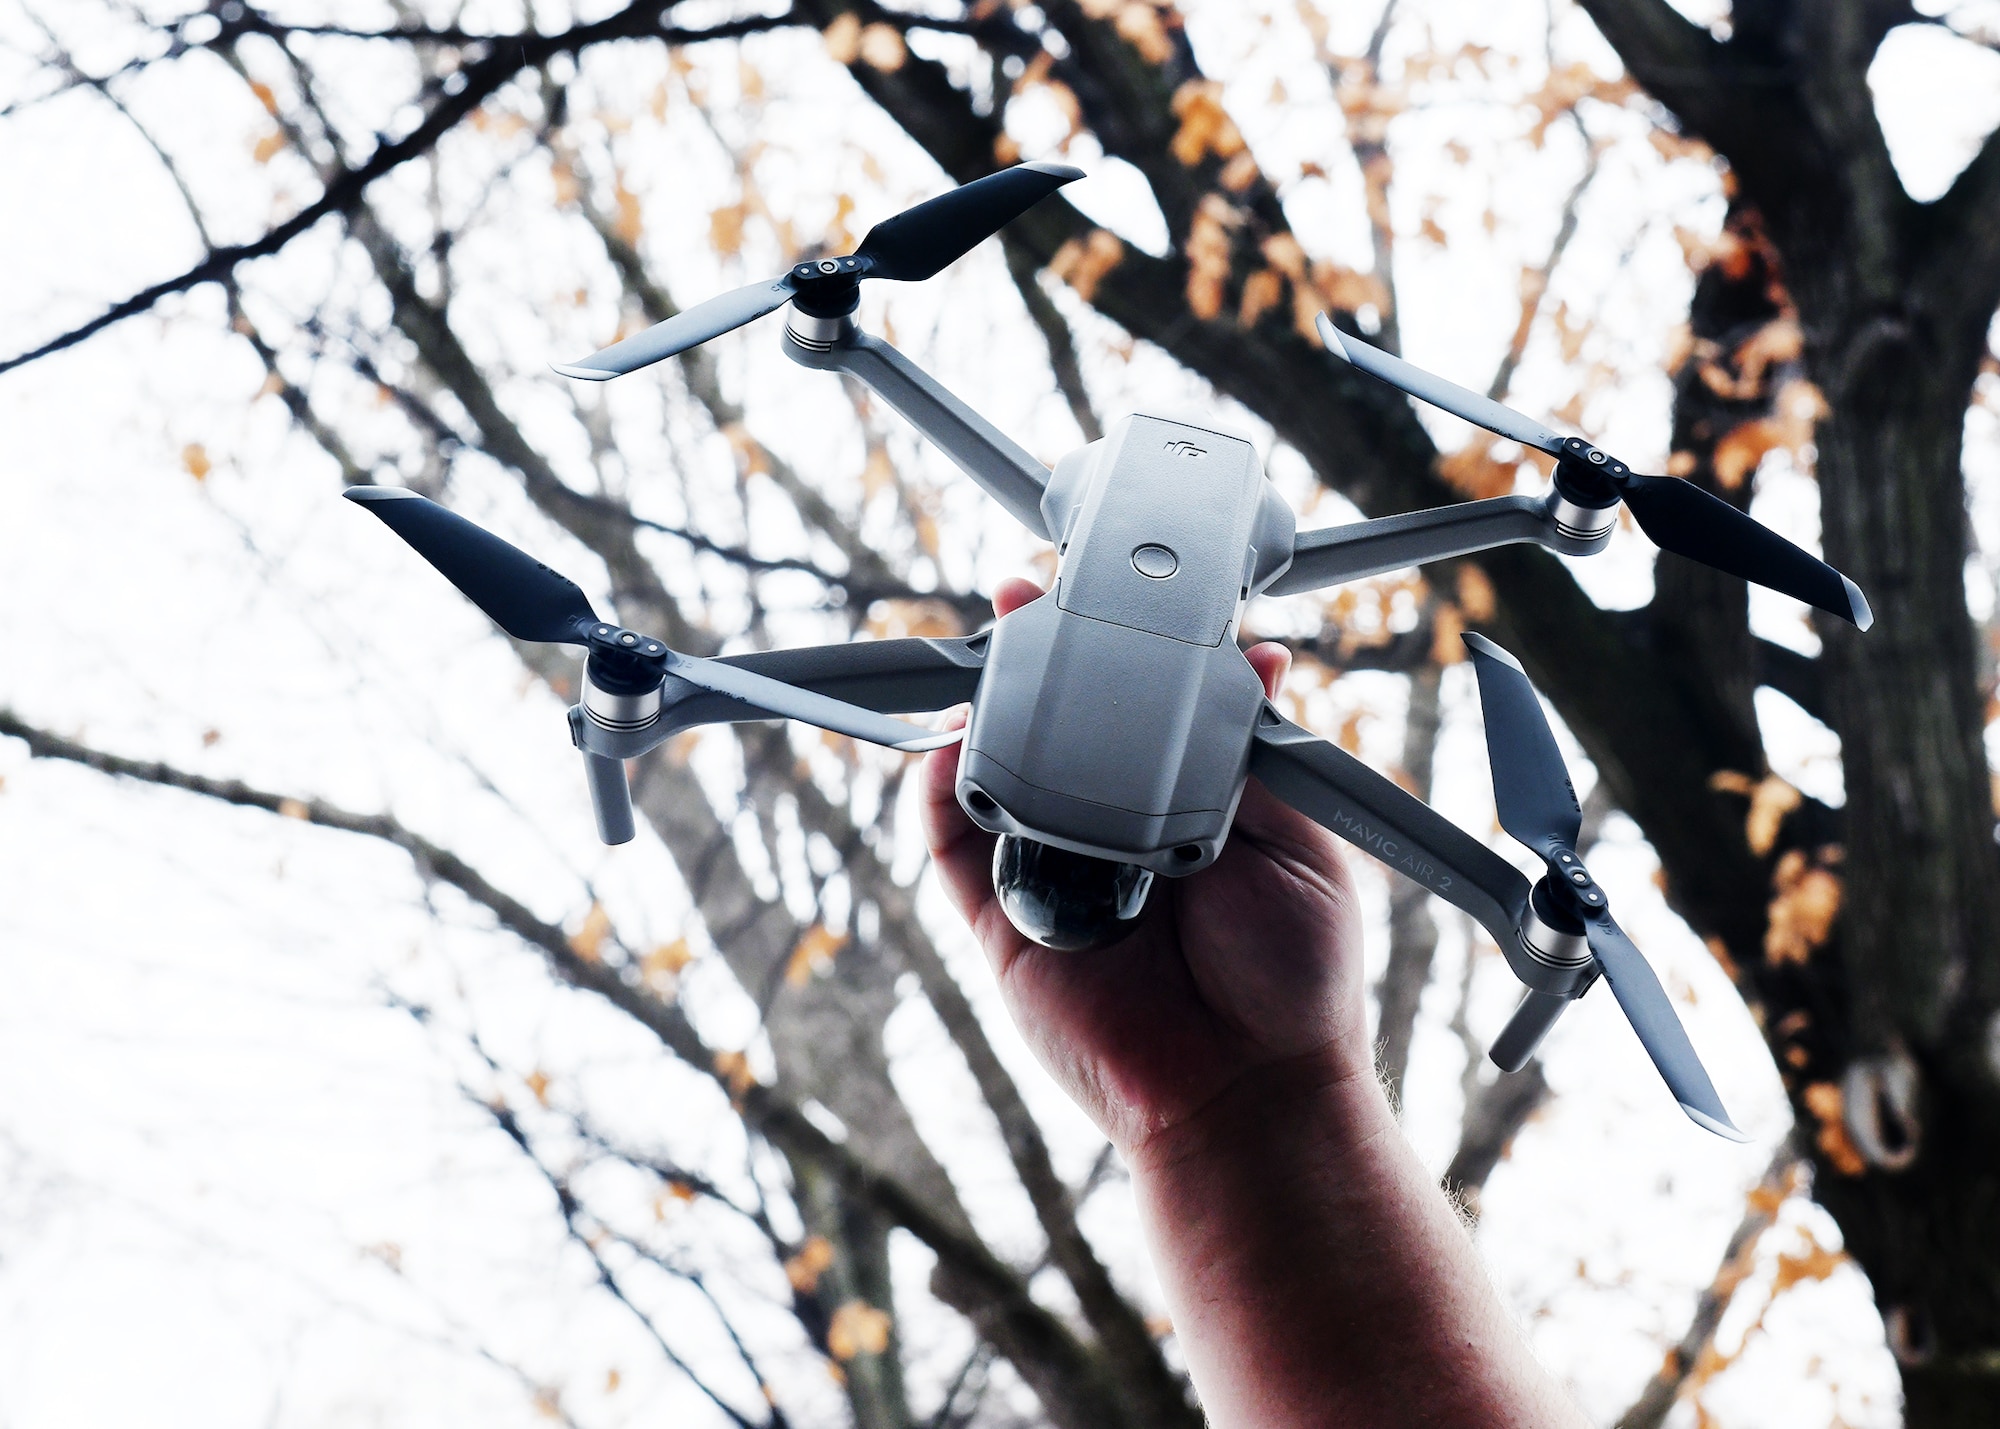 A person's arm holding a drone with tree branches in the background.